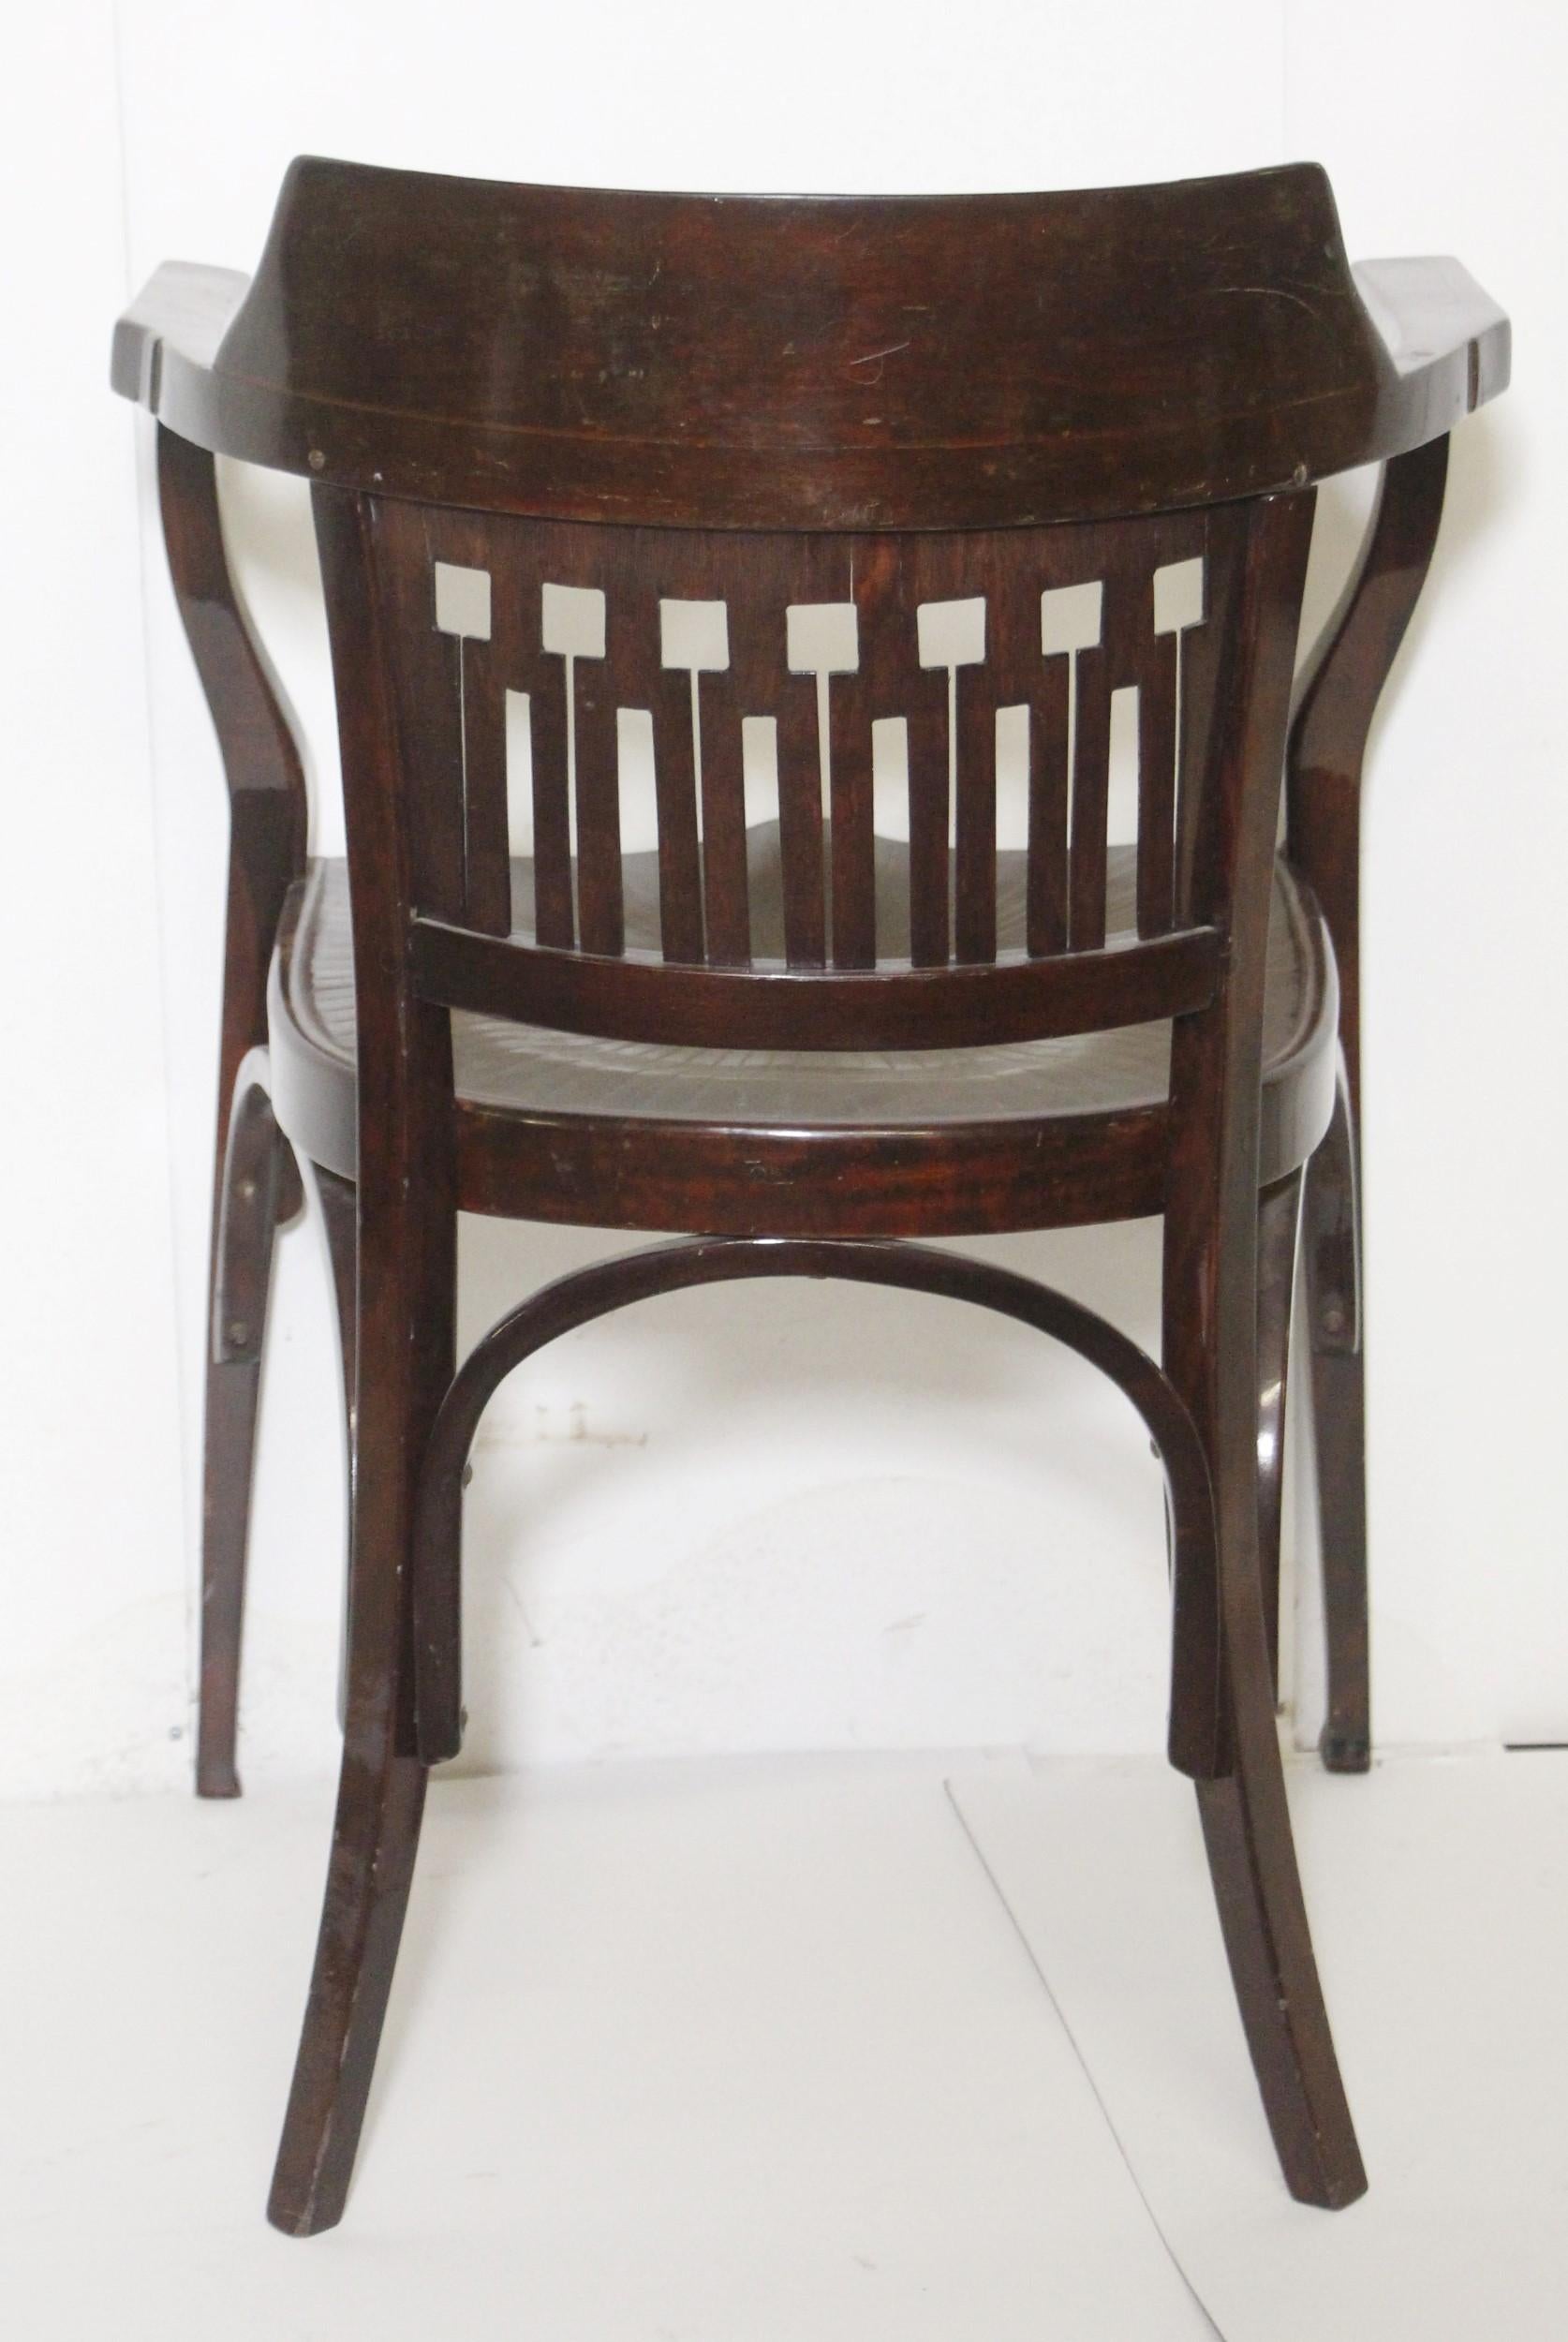 J. J. Kohn Secessionist Bentwood Armchair Designed by Otto Wagner Early 1900s 2